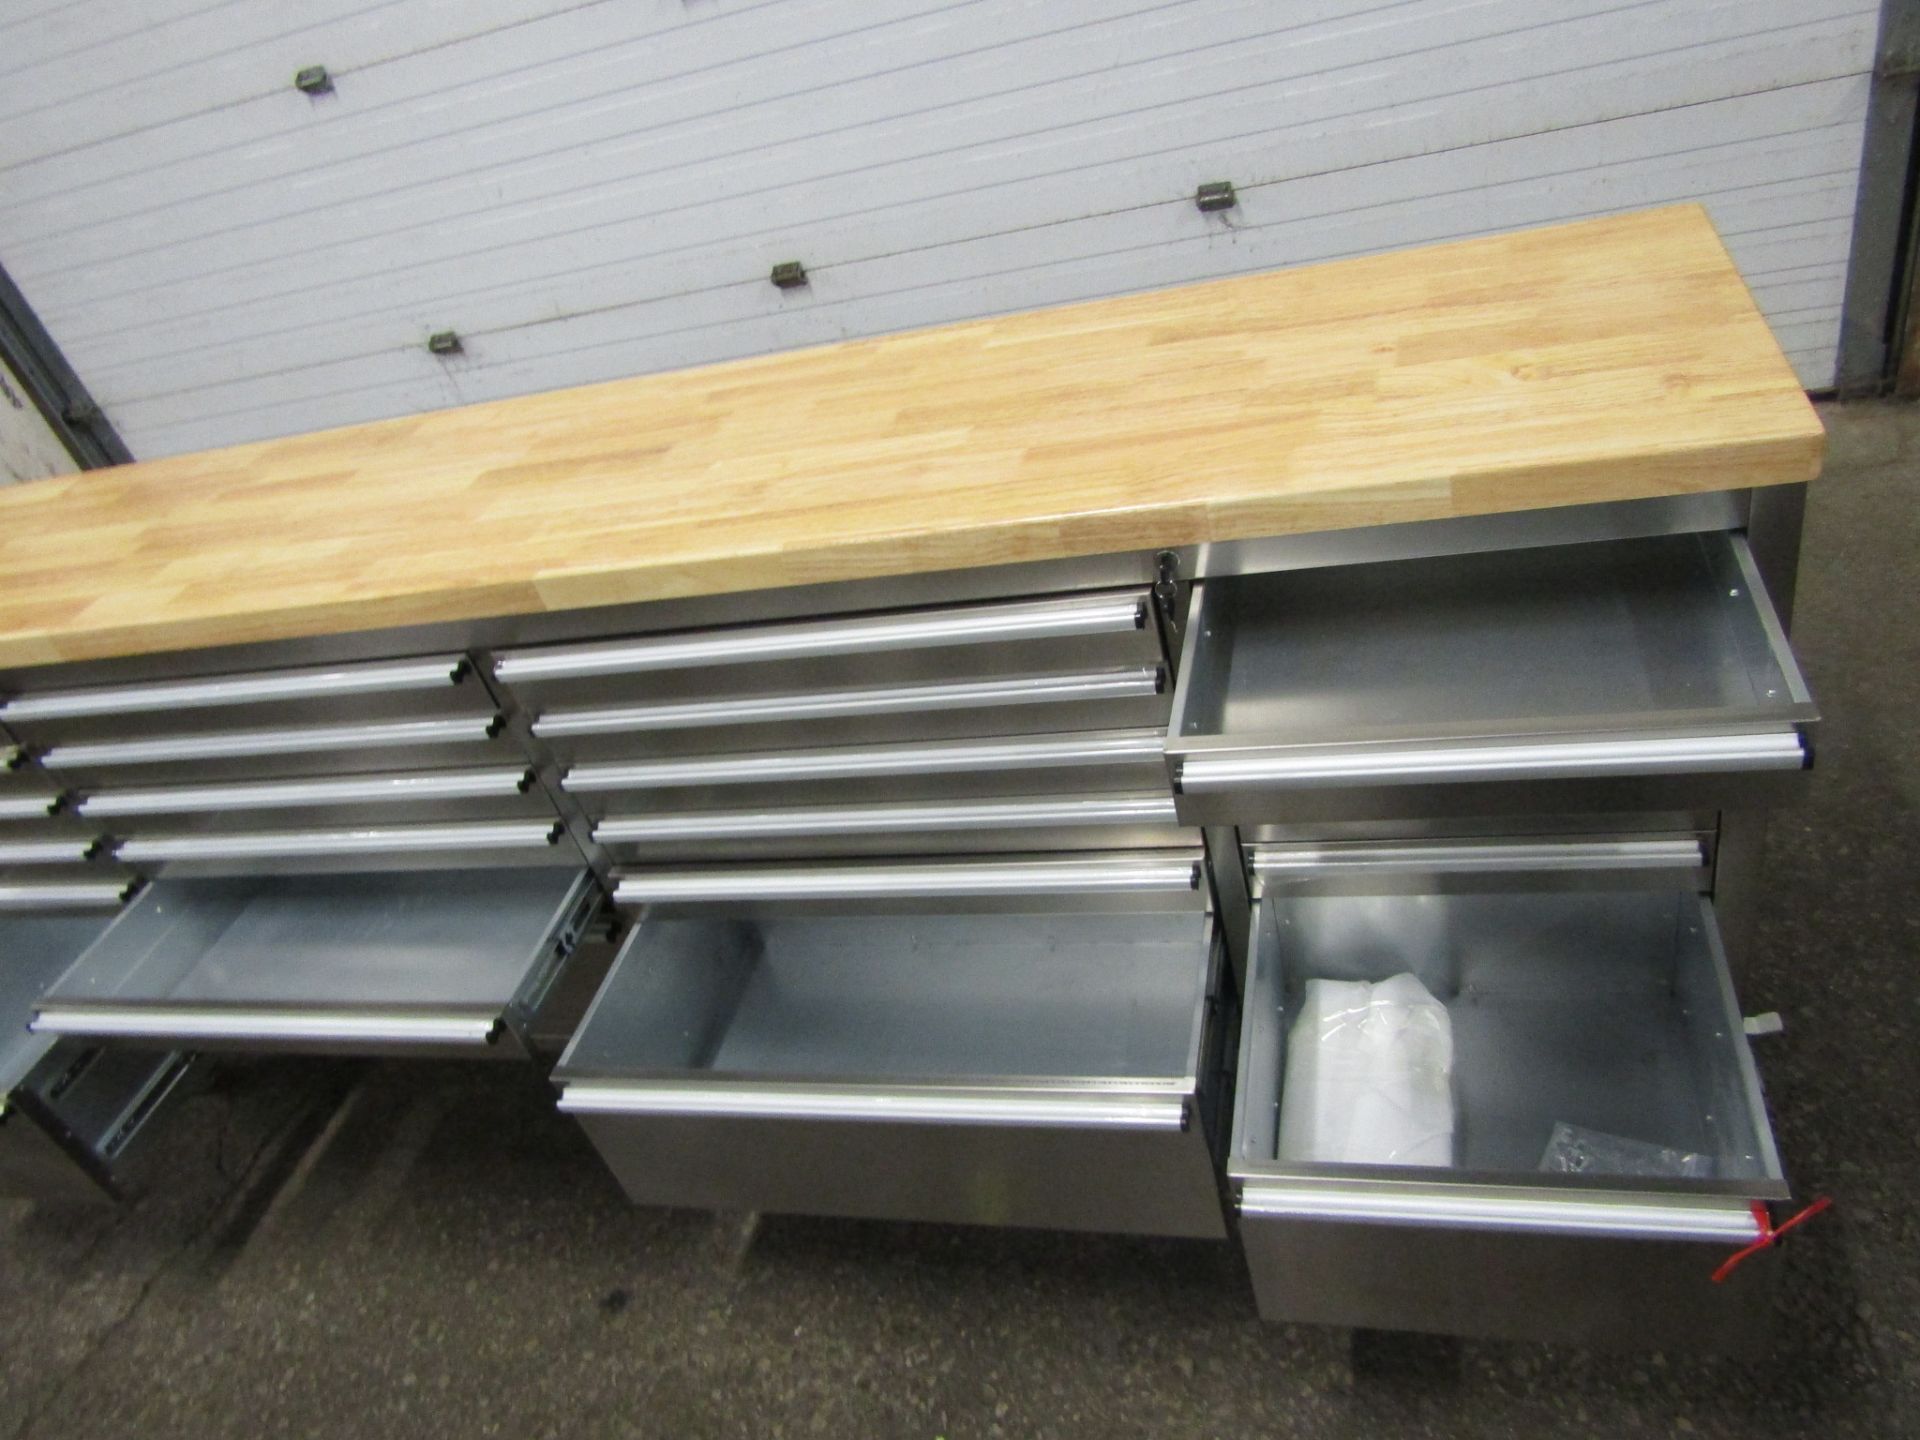 Stainless Steel Cabinet 8' long X 24" deep with 24 drawers and butcher block top NEW MINT UNIT - Image 2 of 2